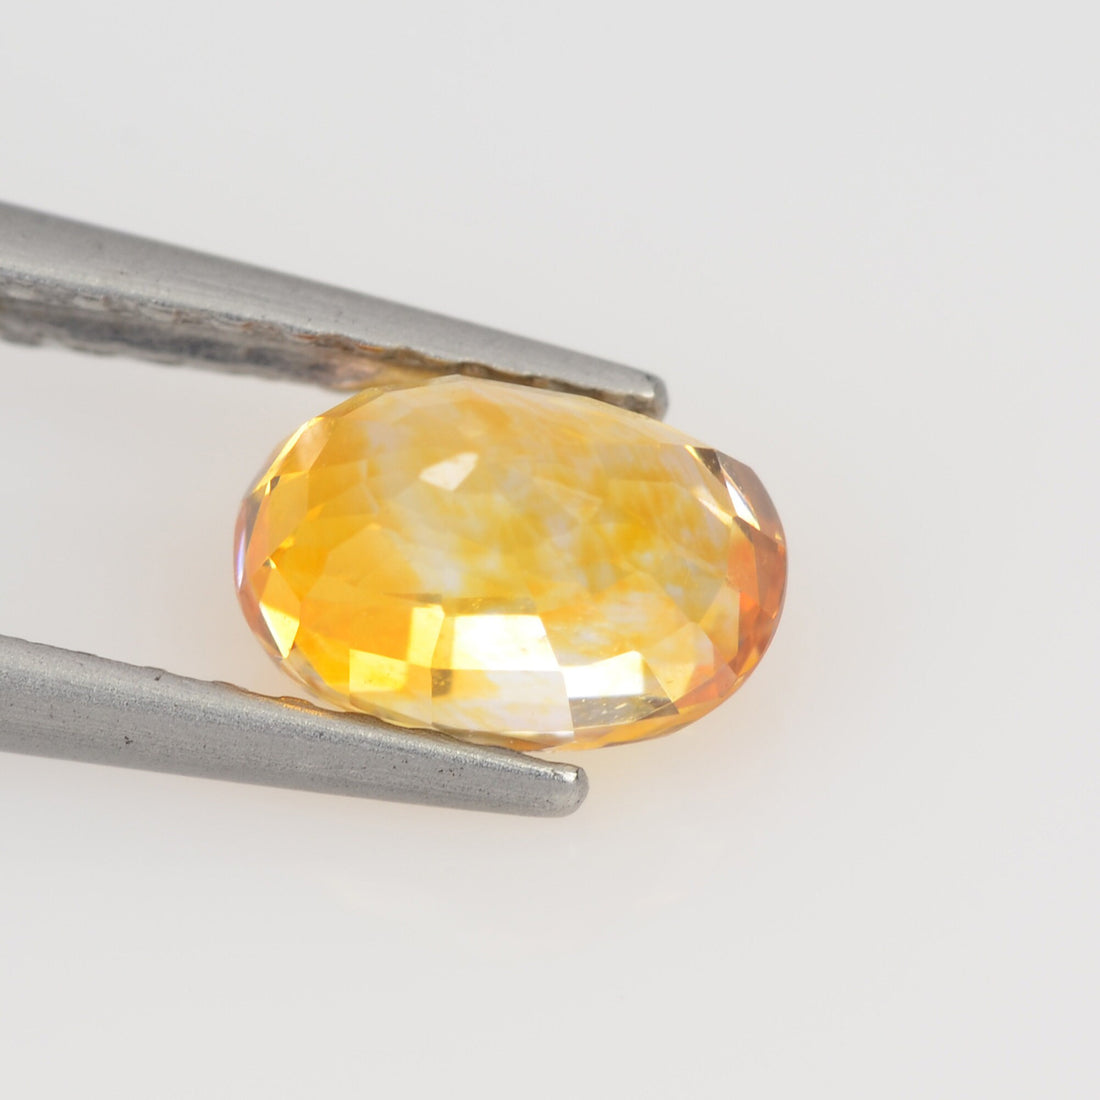 1.06 cts Natural Yellow Sapphire Loose Gemstone Oval Cut